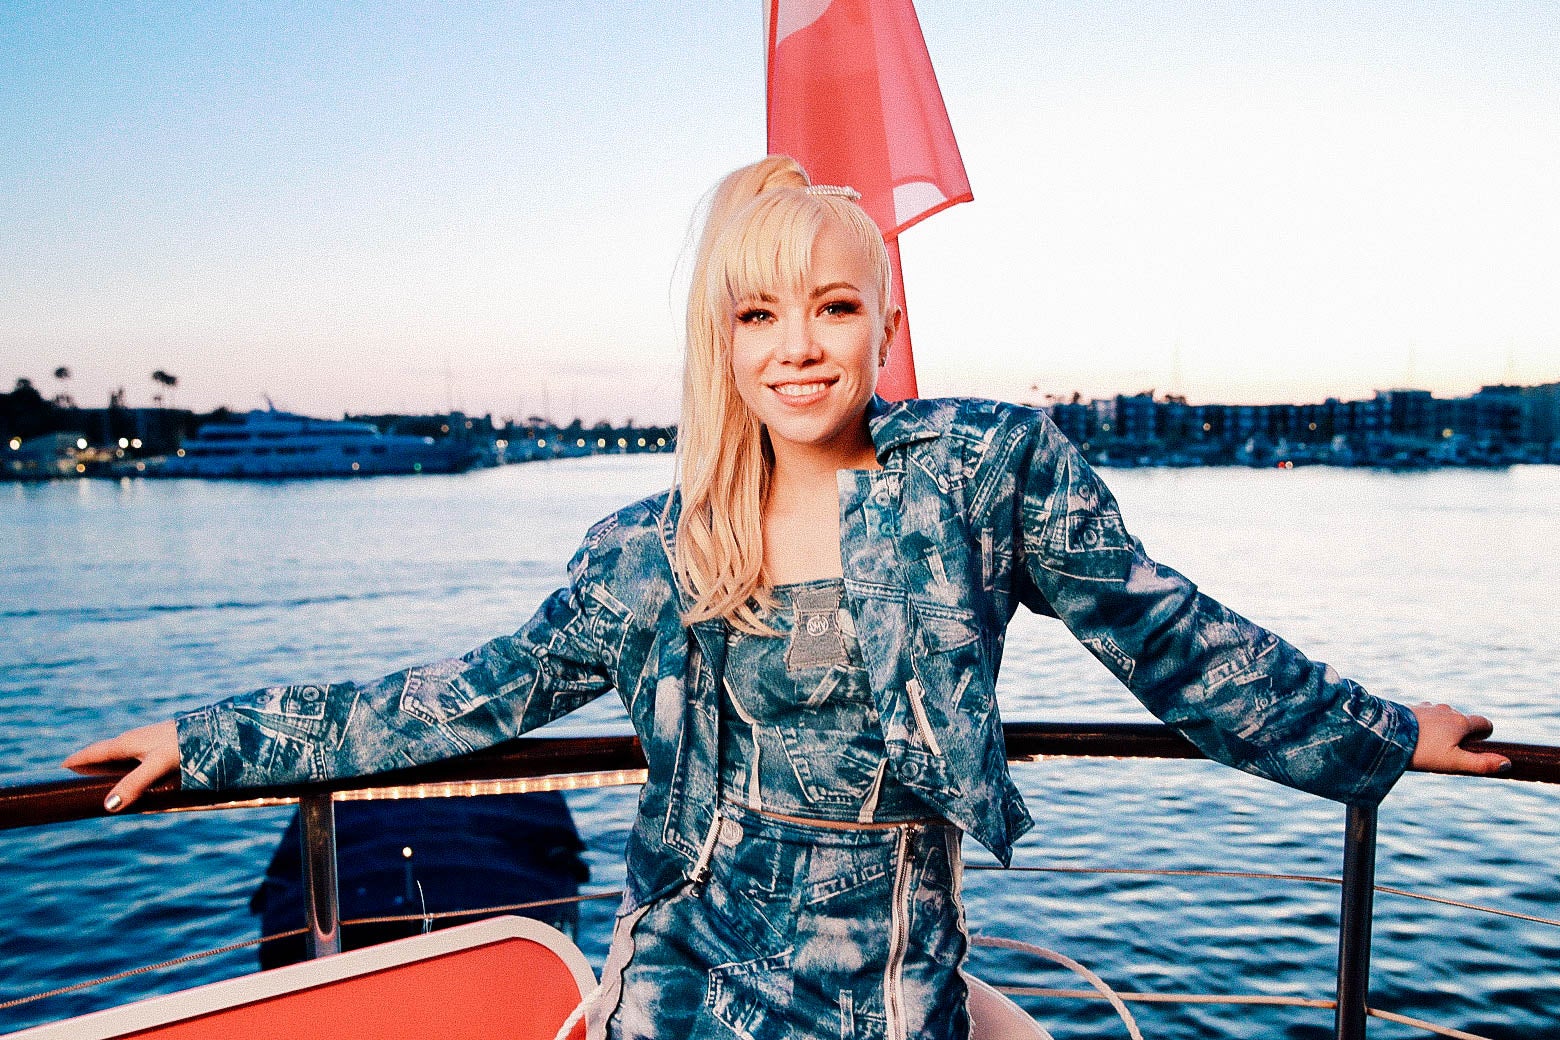 Carly Rae Jepsen in an all-denim outfit on a boat in a harbor.